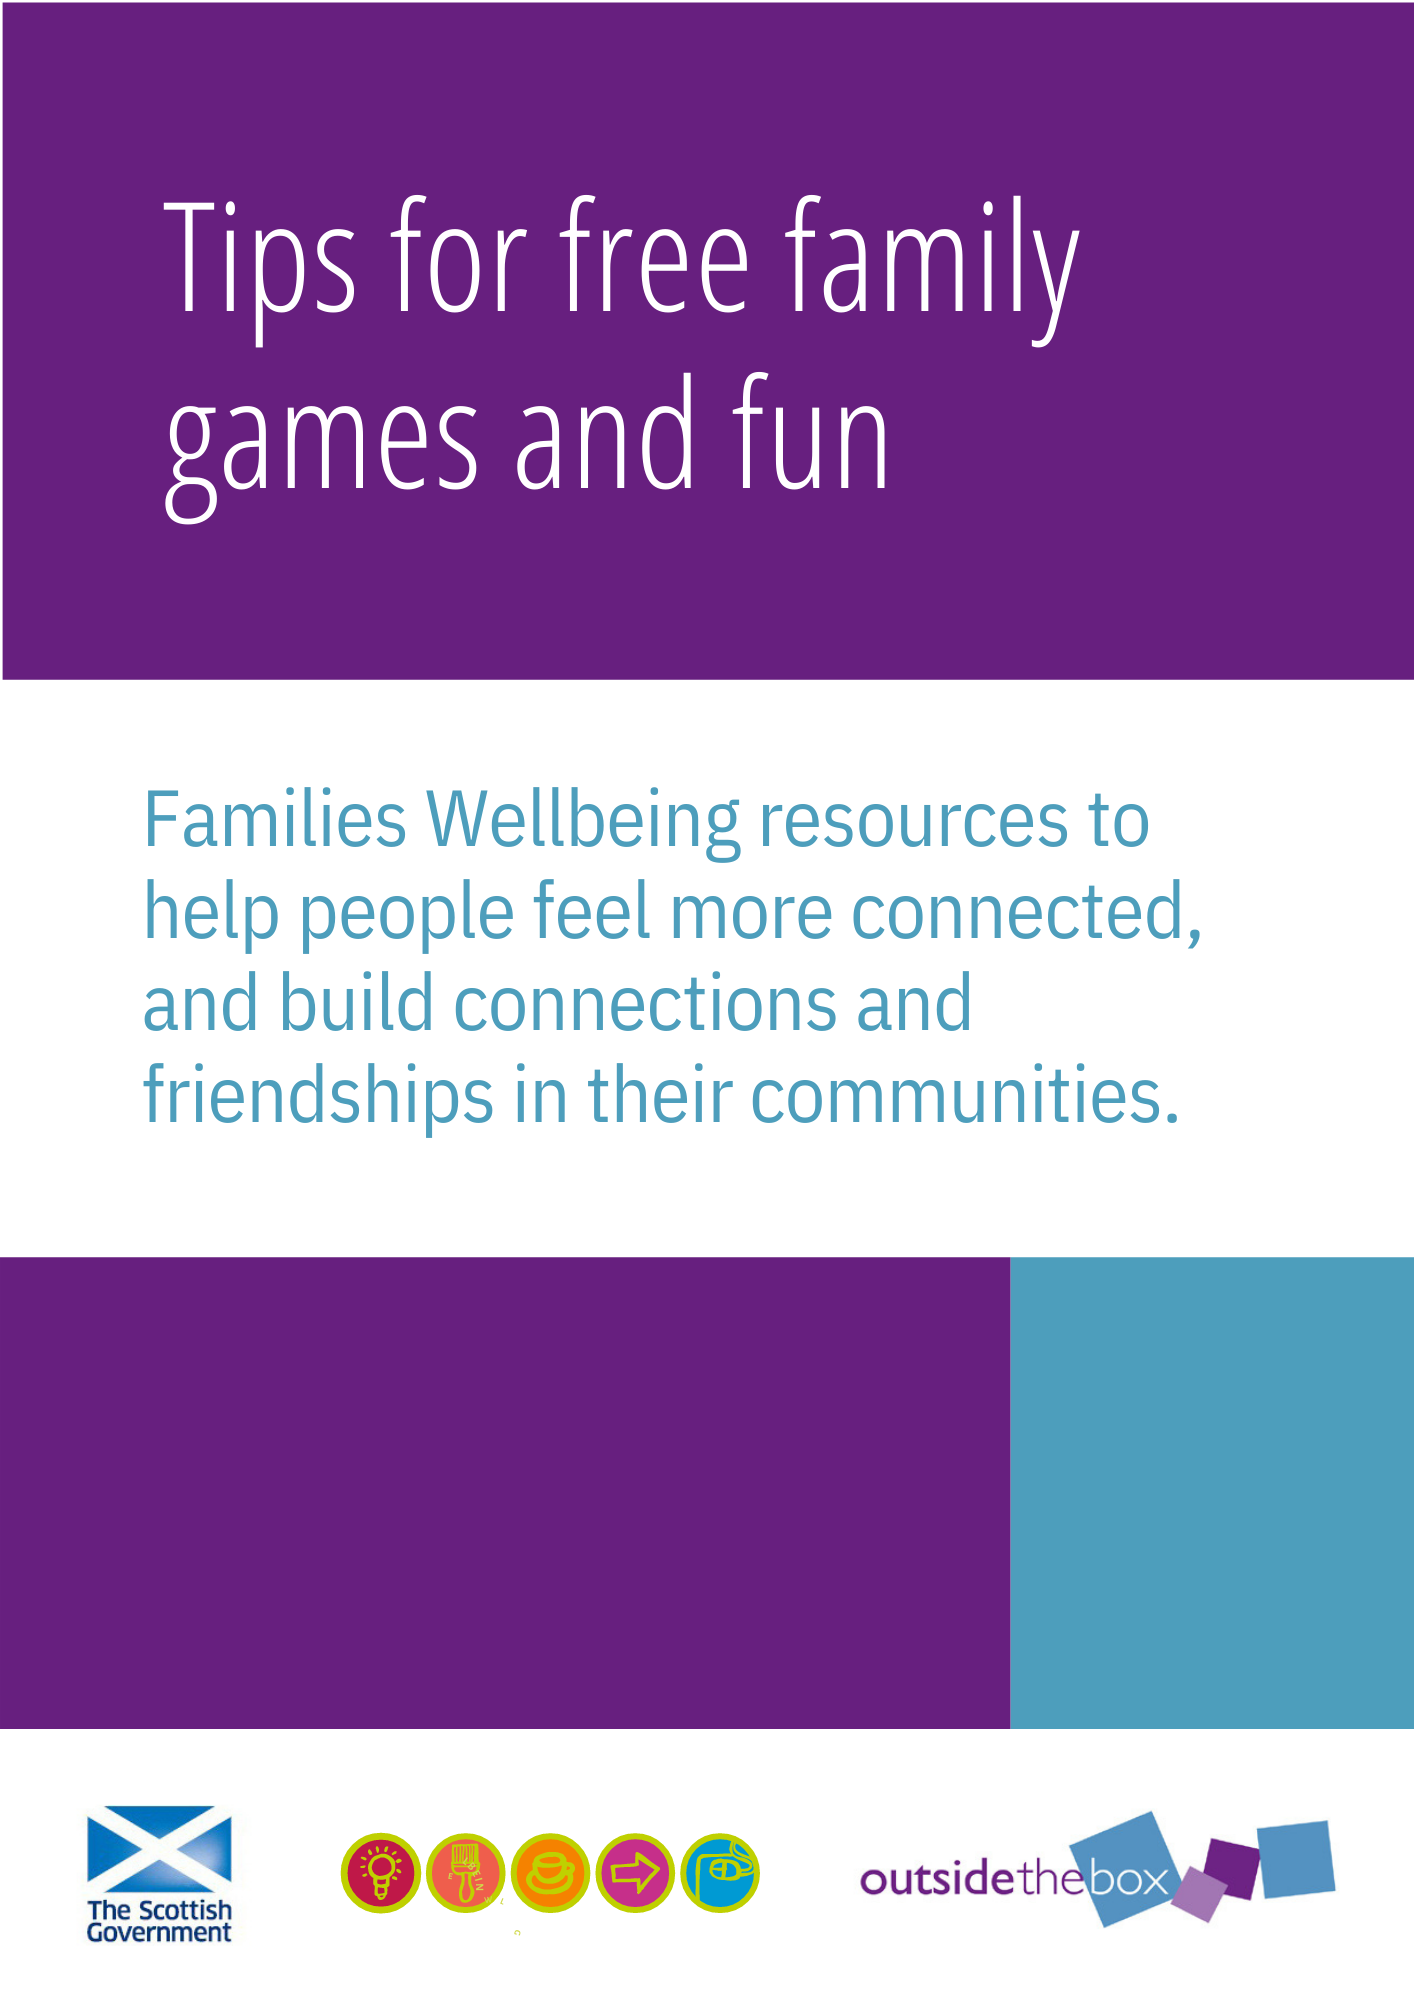 Tips for free family games and fun. Families Wellbeing resources to help people feel more connected, and build connections and friendships in their communities.